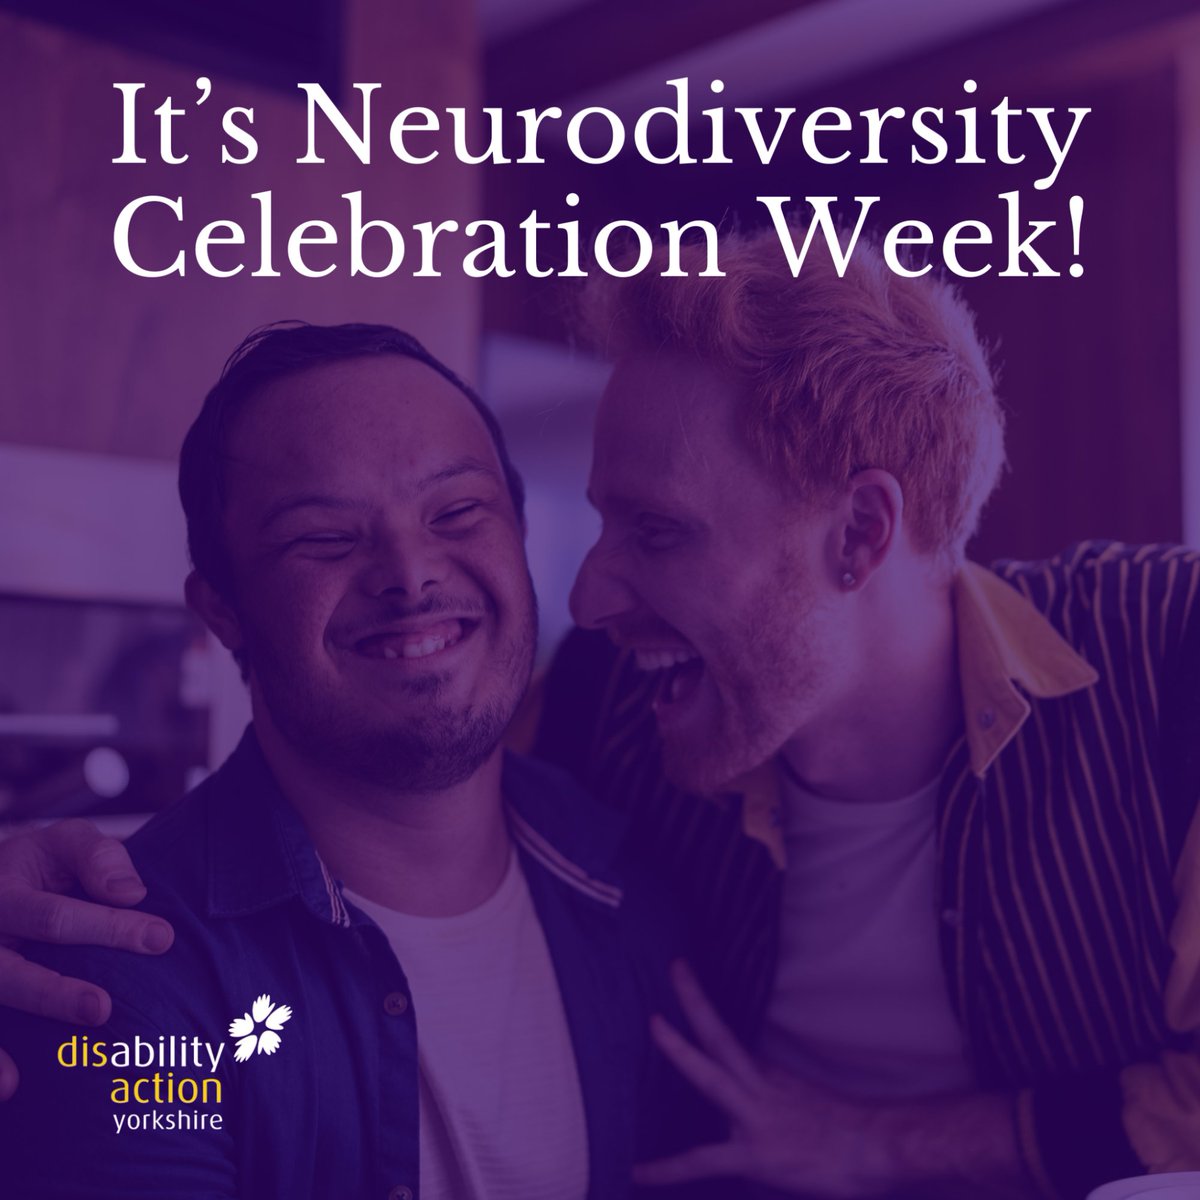 It’s officially neurodiversity celebration week! This week is all about recognising and celebrating the strengths of people who are neurodiverse. So join us in the fight for a more accepting, inclusive, and equal society for neurodiverse people. #DAY #DisabilityActionYorkshire